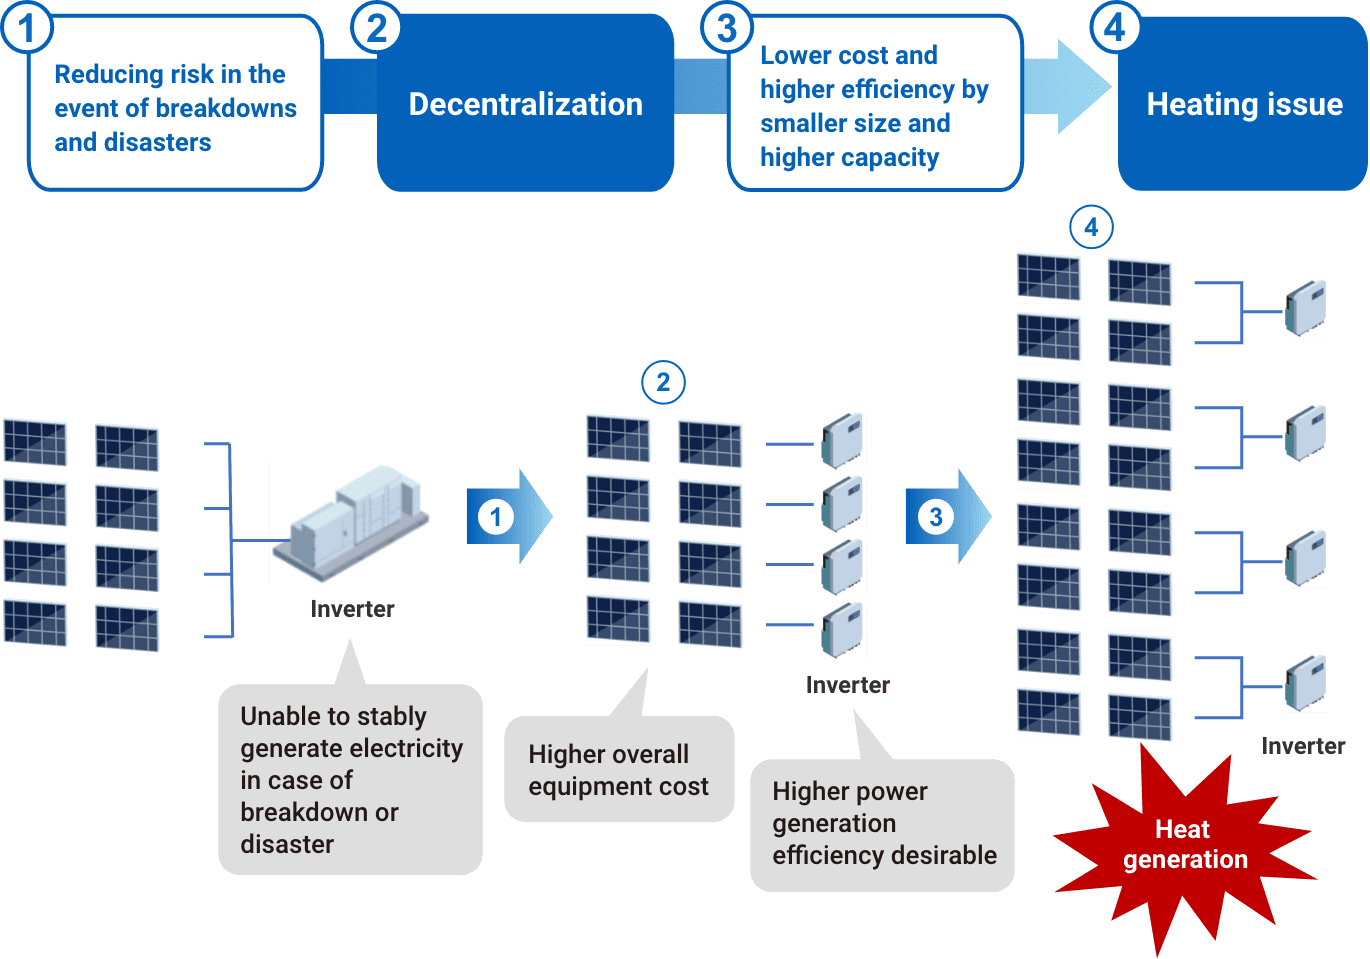 1.Reducing risk in the event of breakdowns and disasters. 2.Decentralization. 3.Lower cost and higher efficiency by smaller size and higher capacity. 4.Heating issue